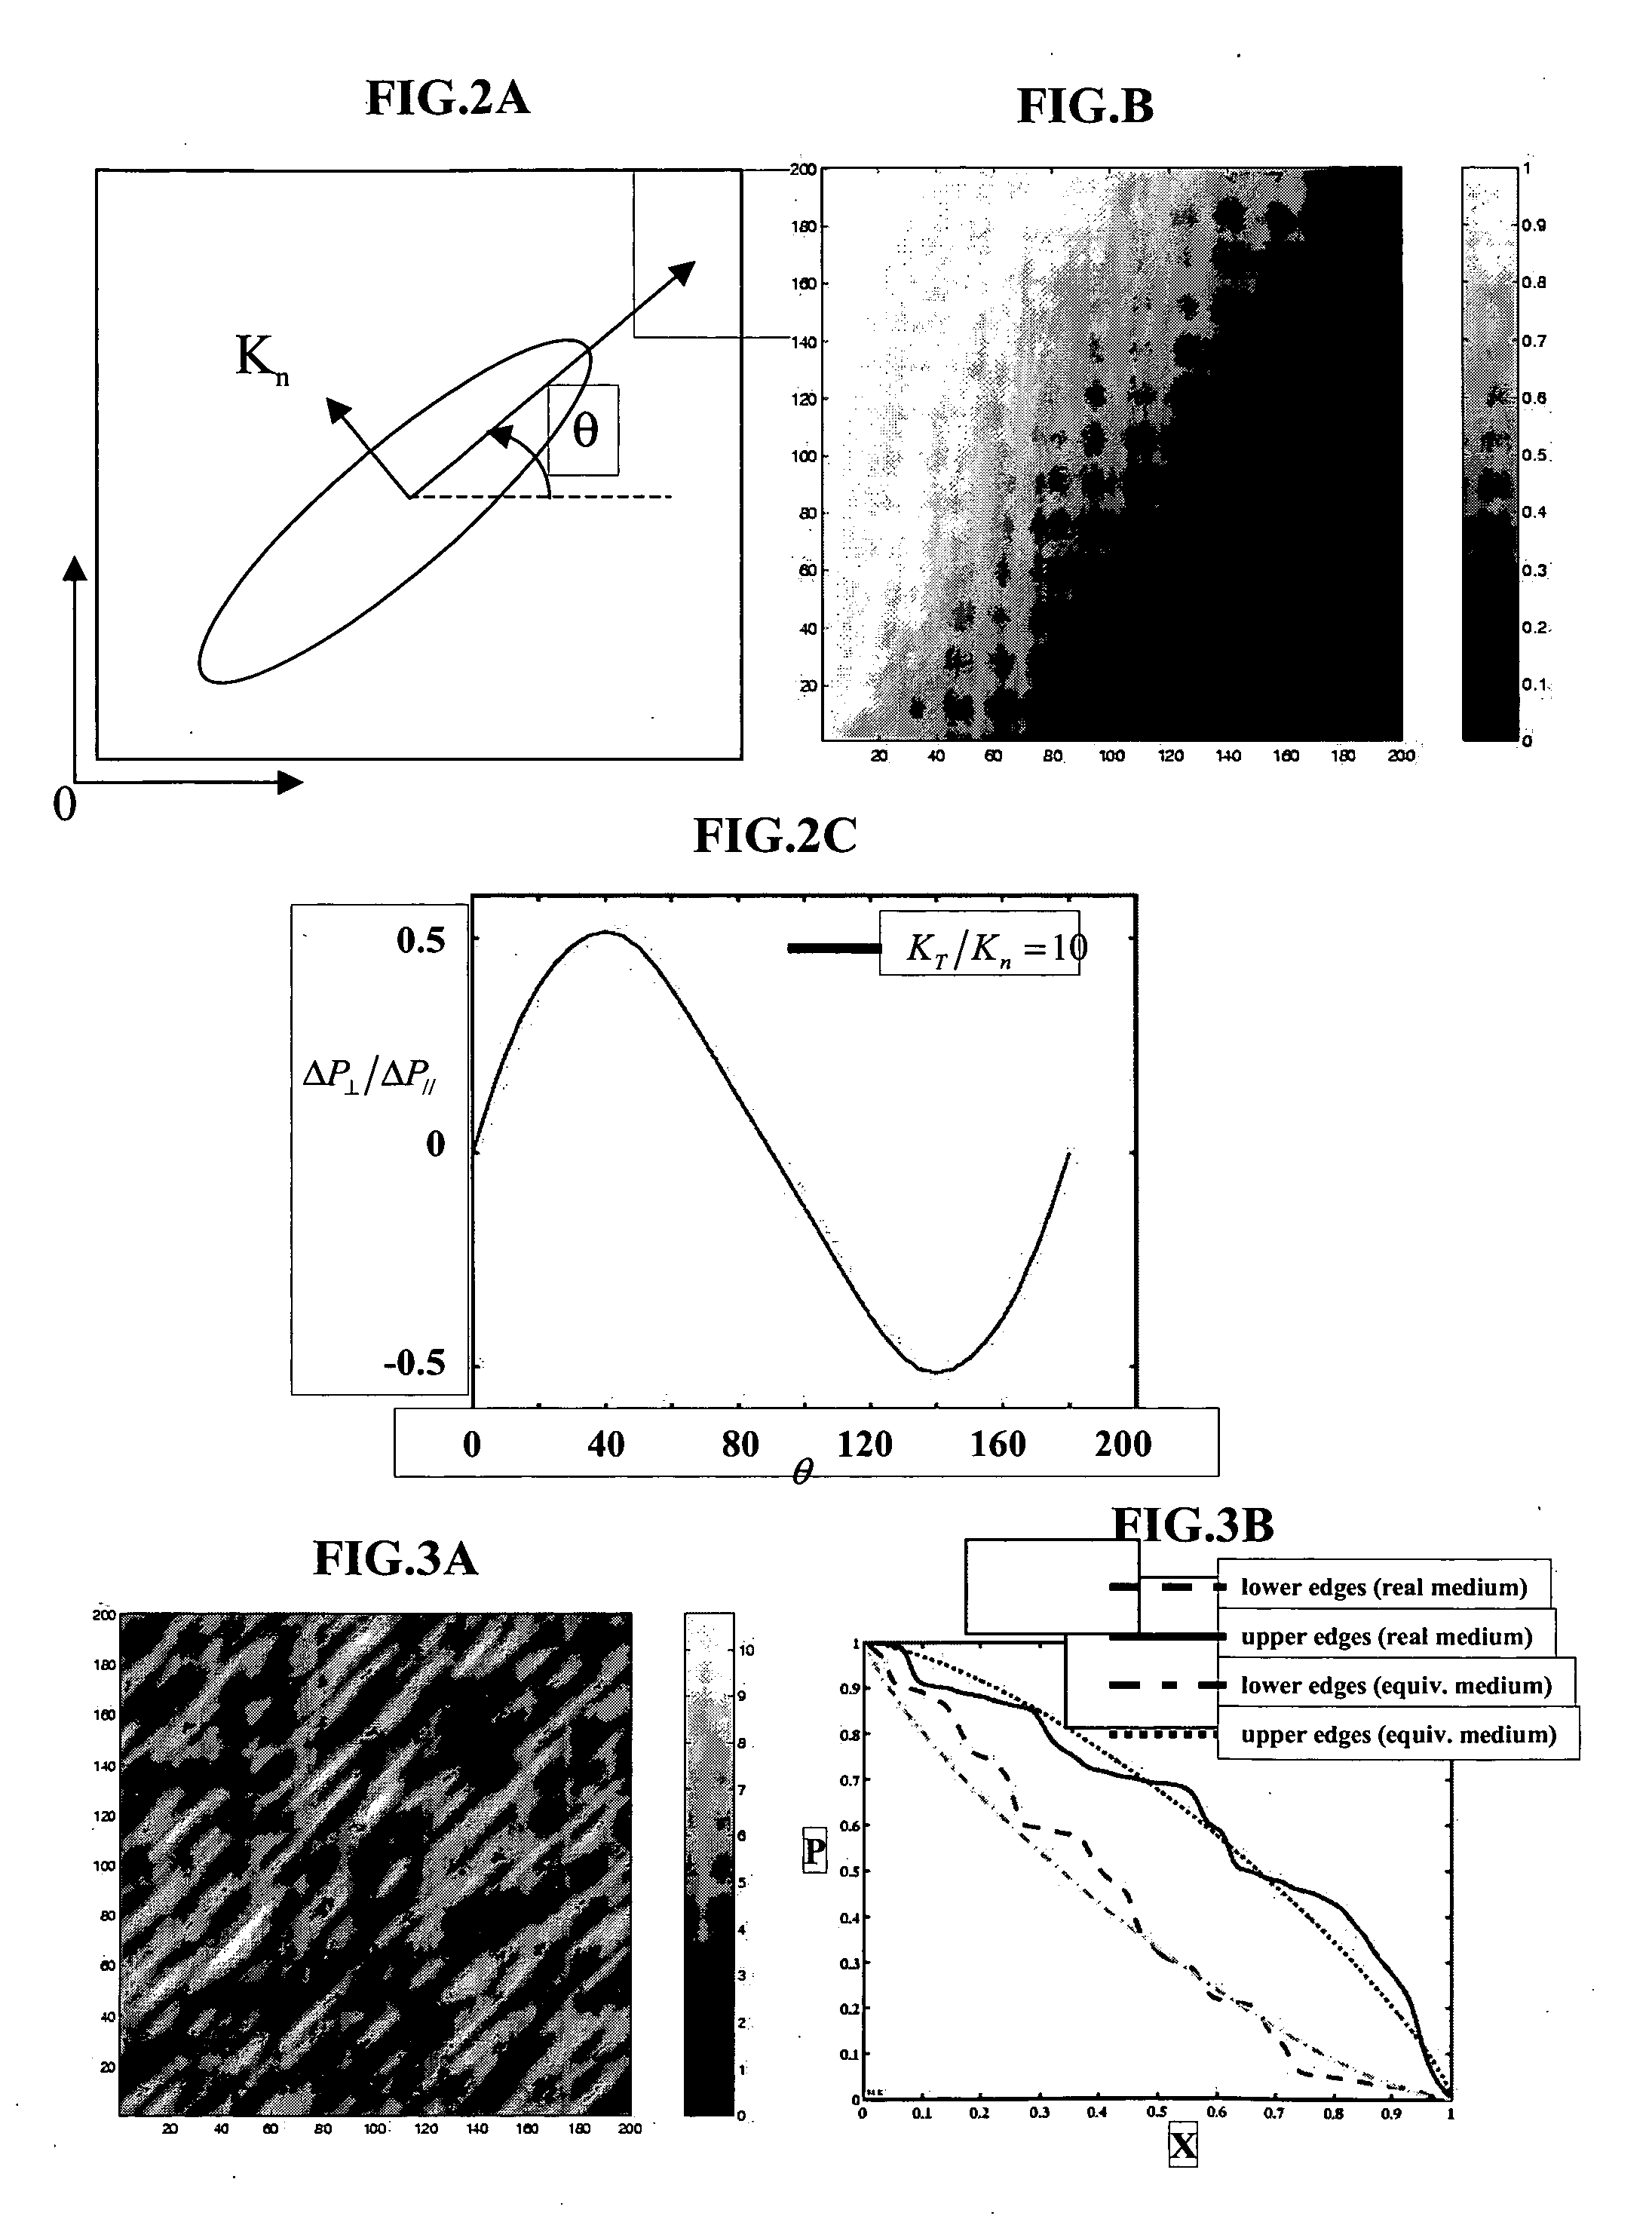 Method of determining the components of an effective permeability tensor of a porous rock